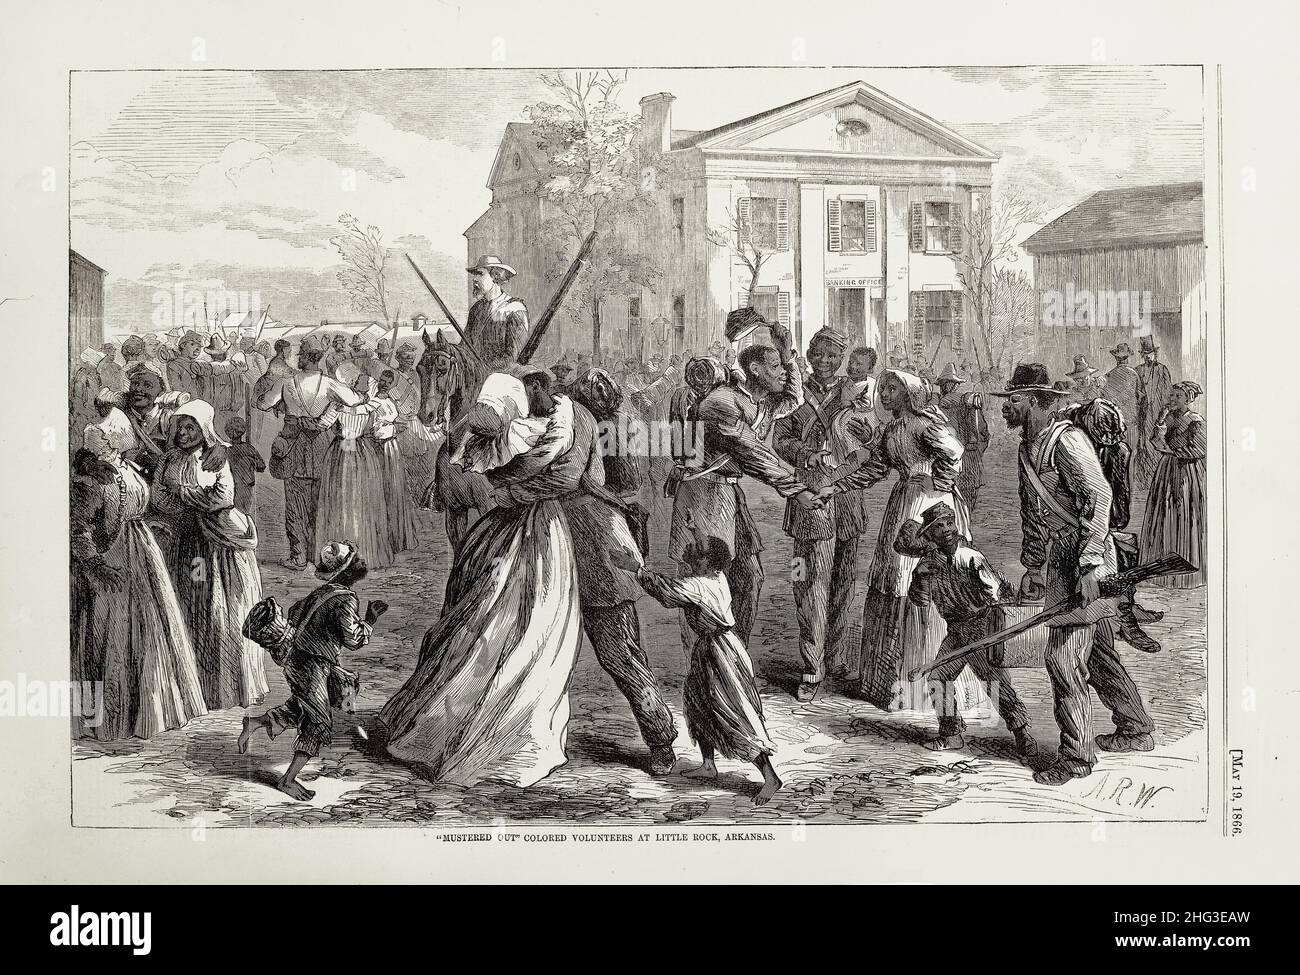 American civil war illustration. African American soldiers mustering out in Little Rock, Arkansas. 1866 Stock Photo